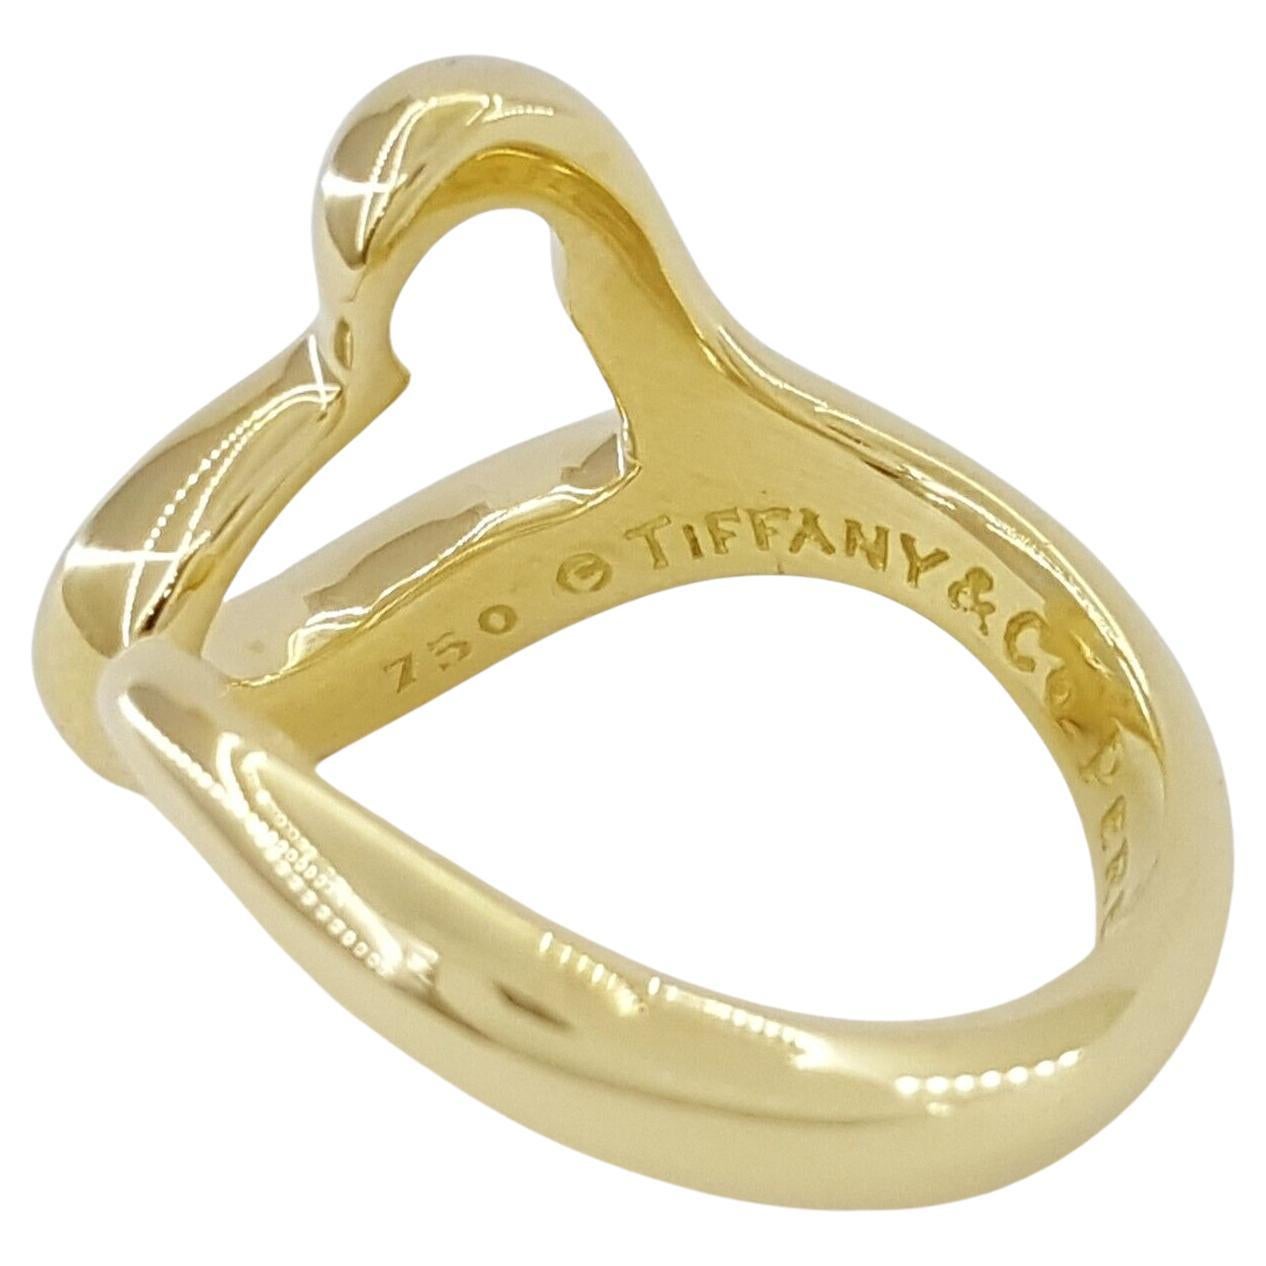 Tiffany & Co. 18K Yellow Gold Elsa Peretti Open Heart Ring is a charming and elegant piece of jewelry from the renowned luxury brand. Here's what you need to know about it:

Material: Crafted from high-quality 18K yellow gold, this ring exudes